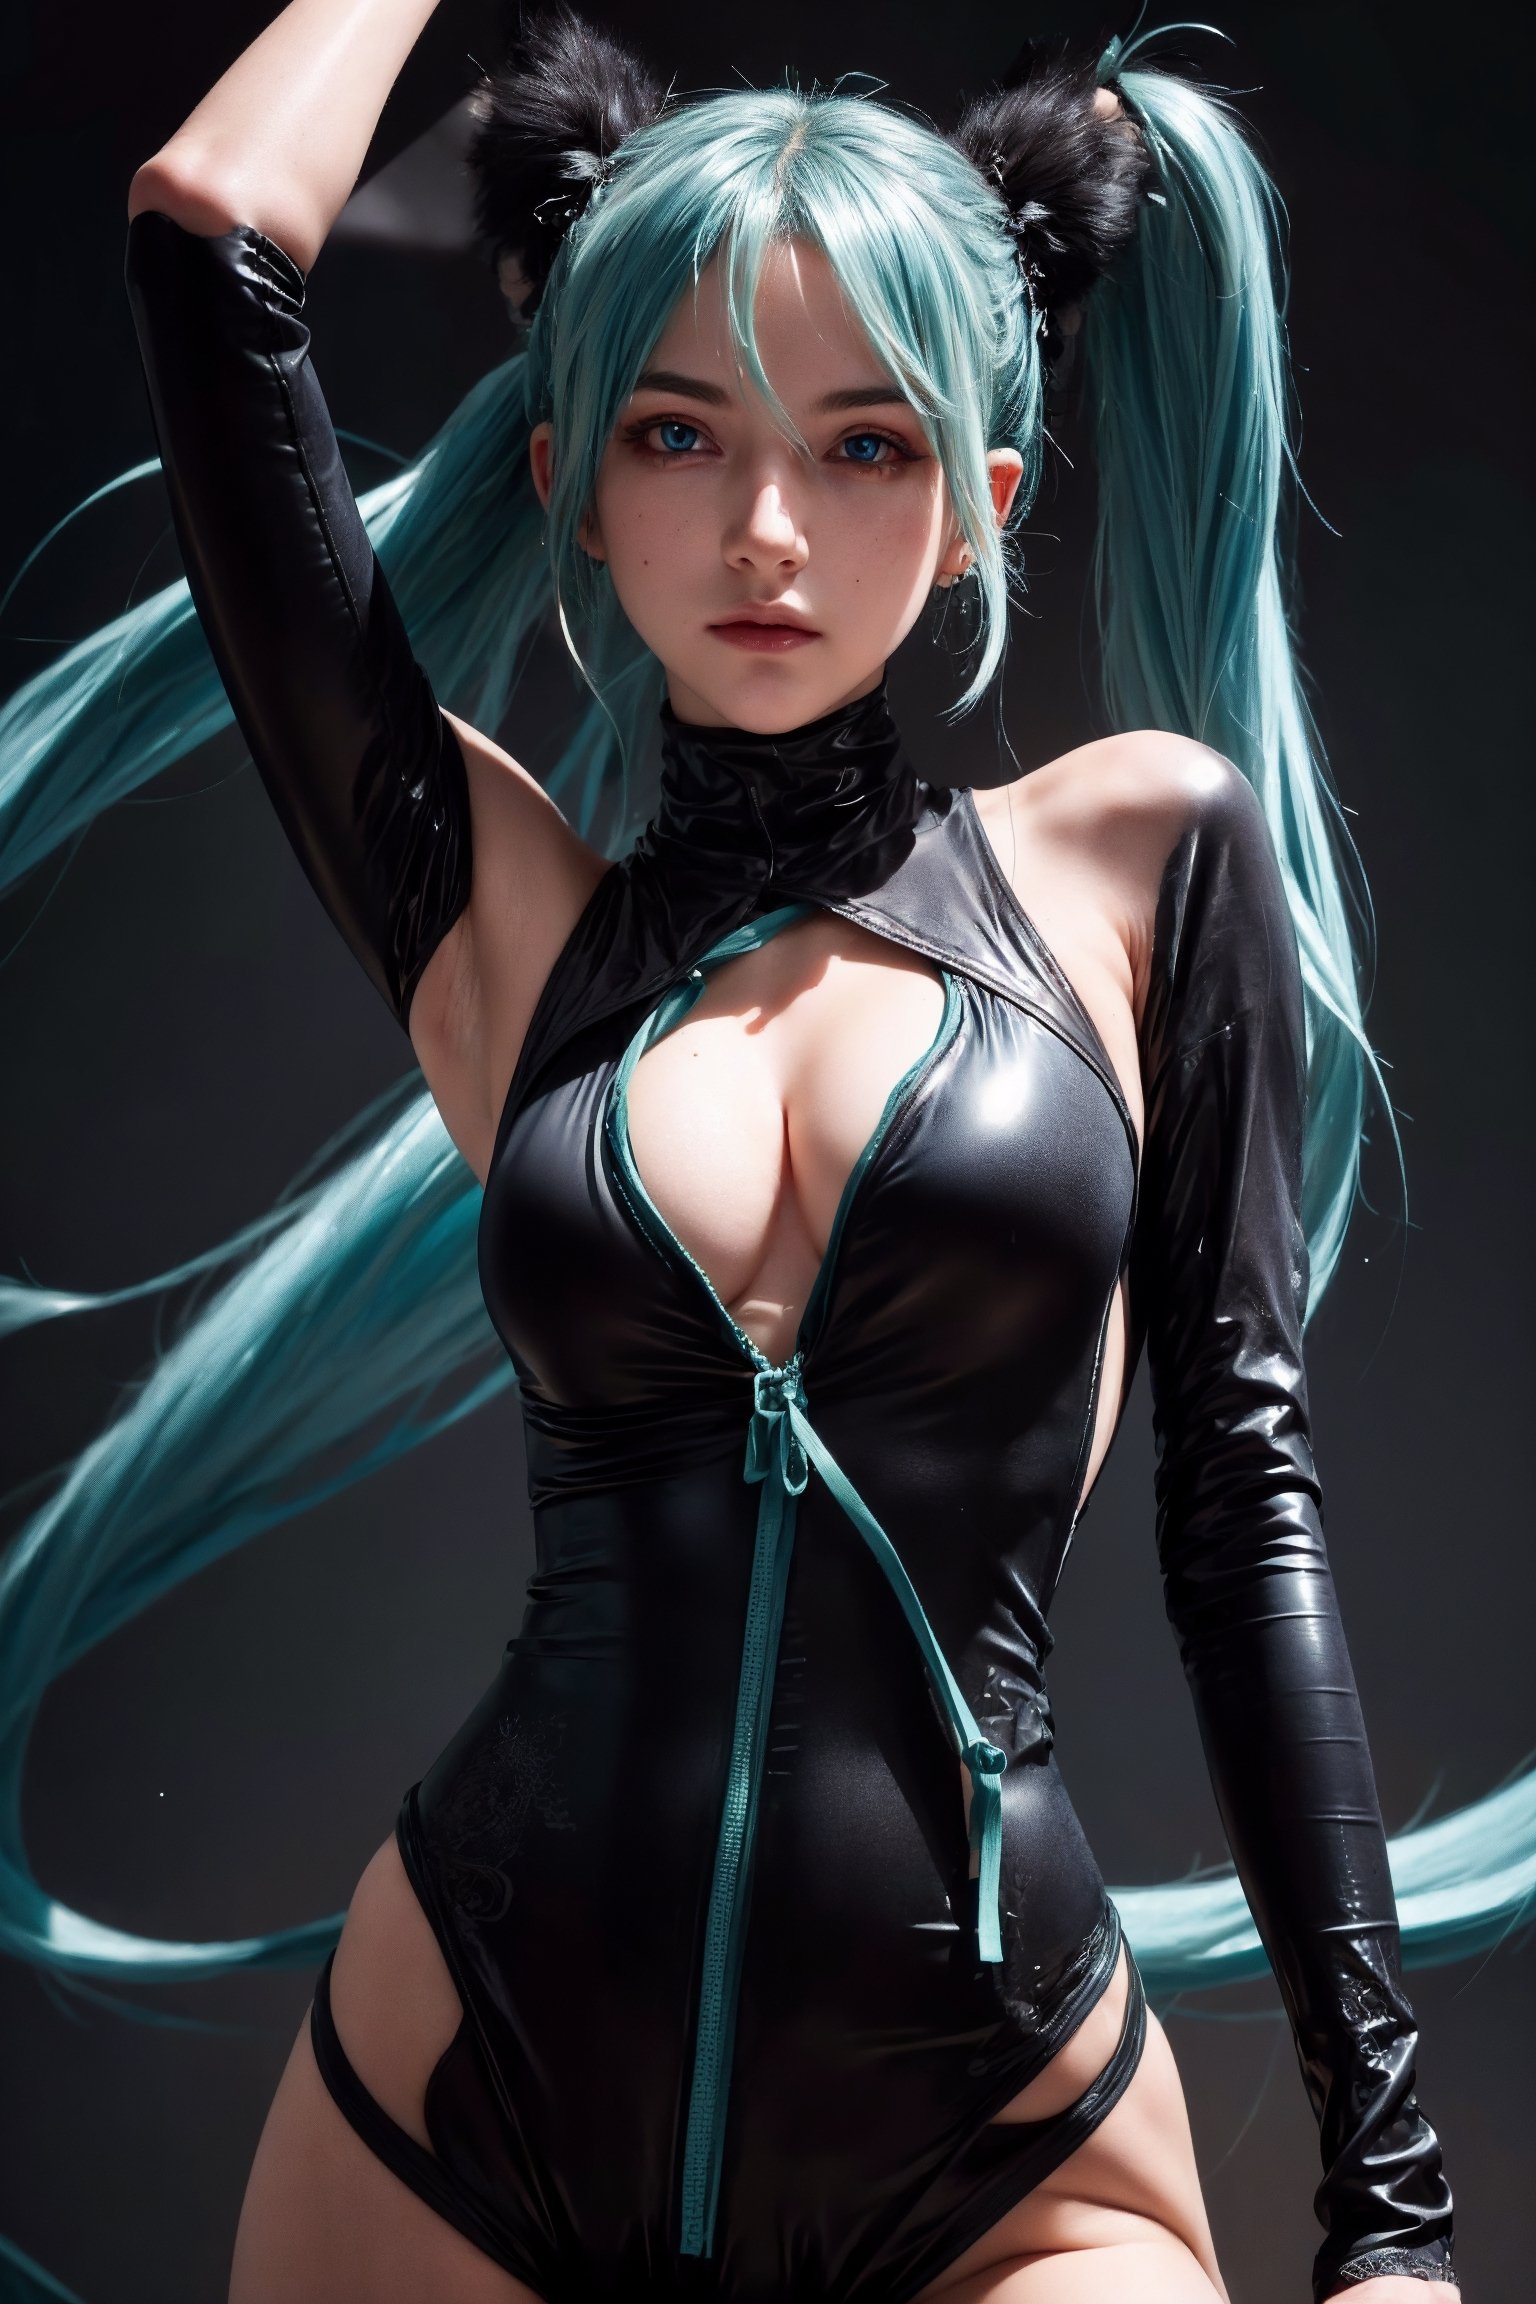 1 28 year old girl,sexy,noble,arrogant, (tall),hatsune miku double ponytail,(blue-green_hair), naked,nsfw,small bust,underboob,arrogant face,large hoop earrings,exposed breasts ,perfect breasts,showing nipples,
(small bust:1.4),unzipped, (showing pussy:1.3),bodysuit,plugsuit,zipper bodysuit,(black BREAK bodysuit:1.4), BREAK looking at viewer, BREAK , (masterpiece:1.2), best quality, high resolution, unity 8k wallpaper, (illustration:0.8), (beautiful detailed eyes:1.5), extremely detailed face, perfect lighting, extremely detailed CG, (perfect hands, perfect anatomy),perfect,hand,fingers,
(dynamic pose:1.3),anime screencap,latexsuit,hatsune miku